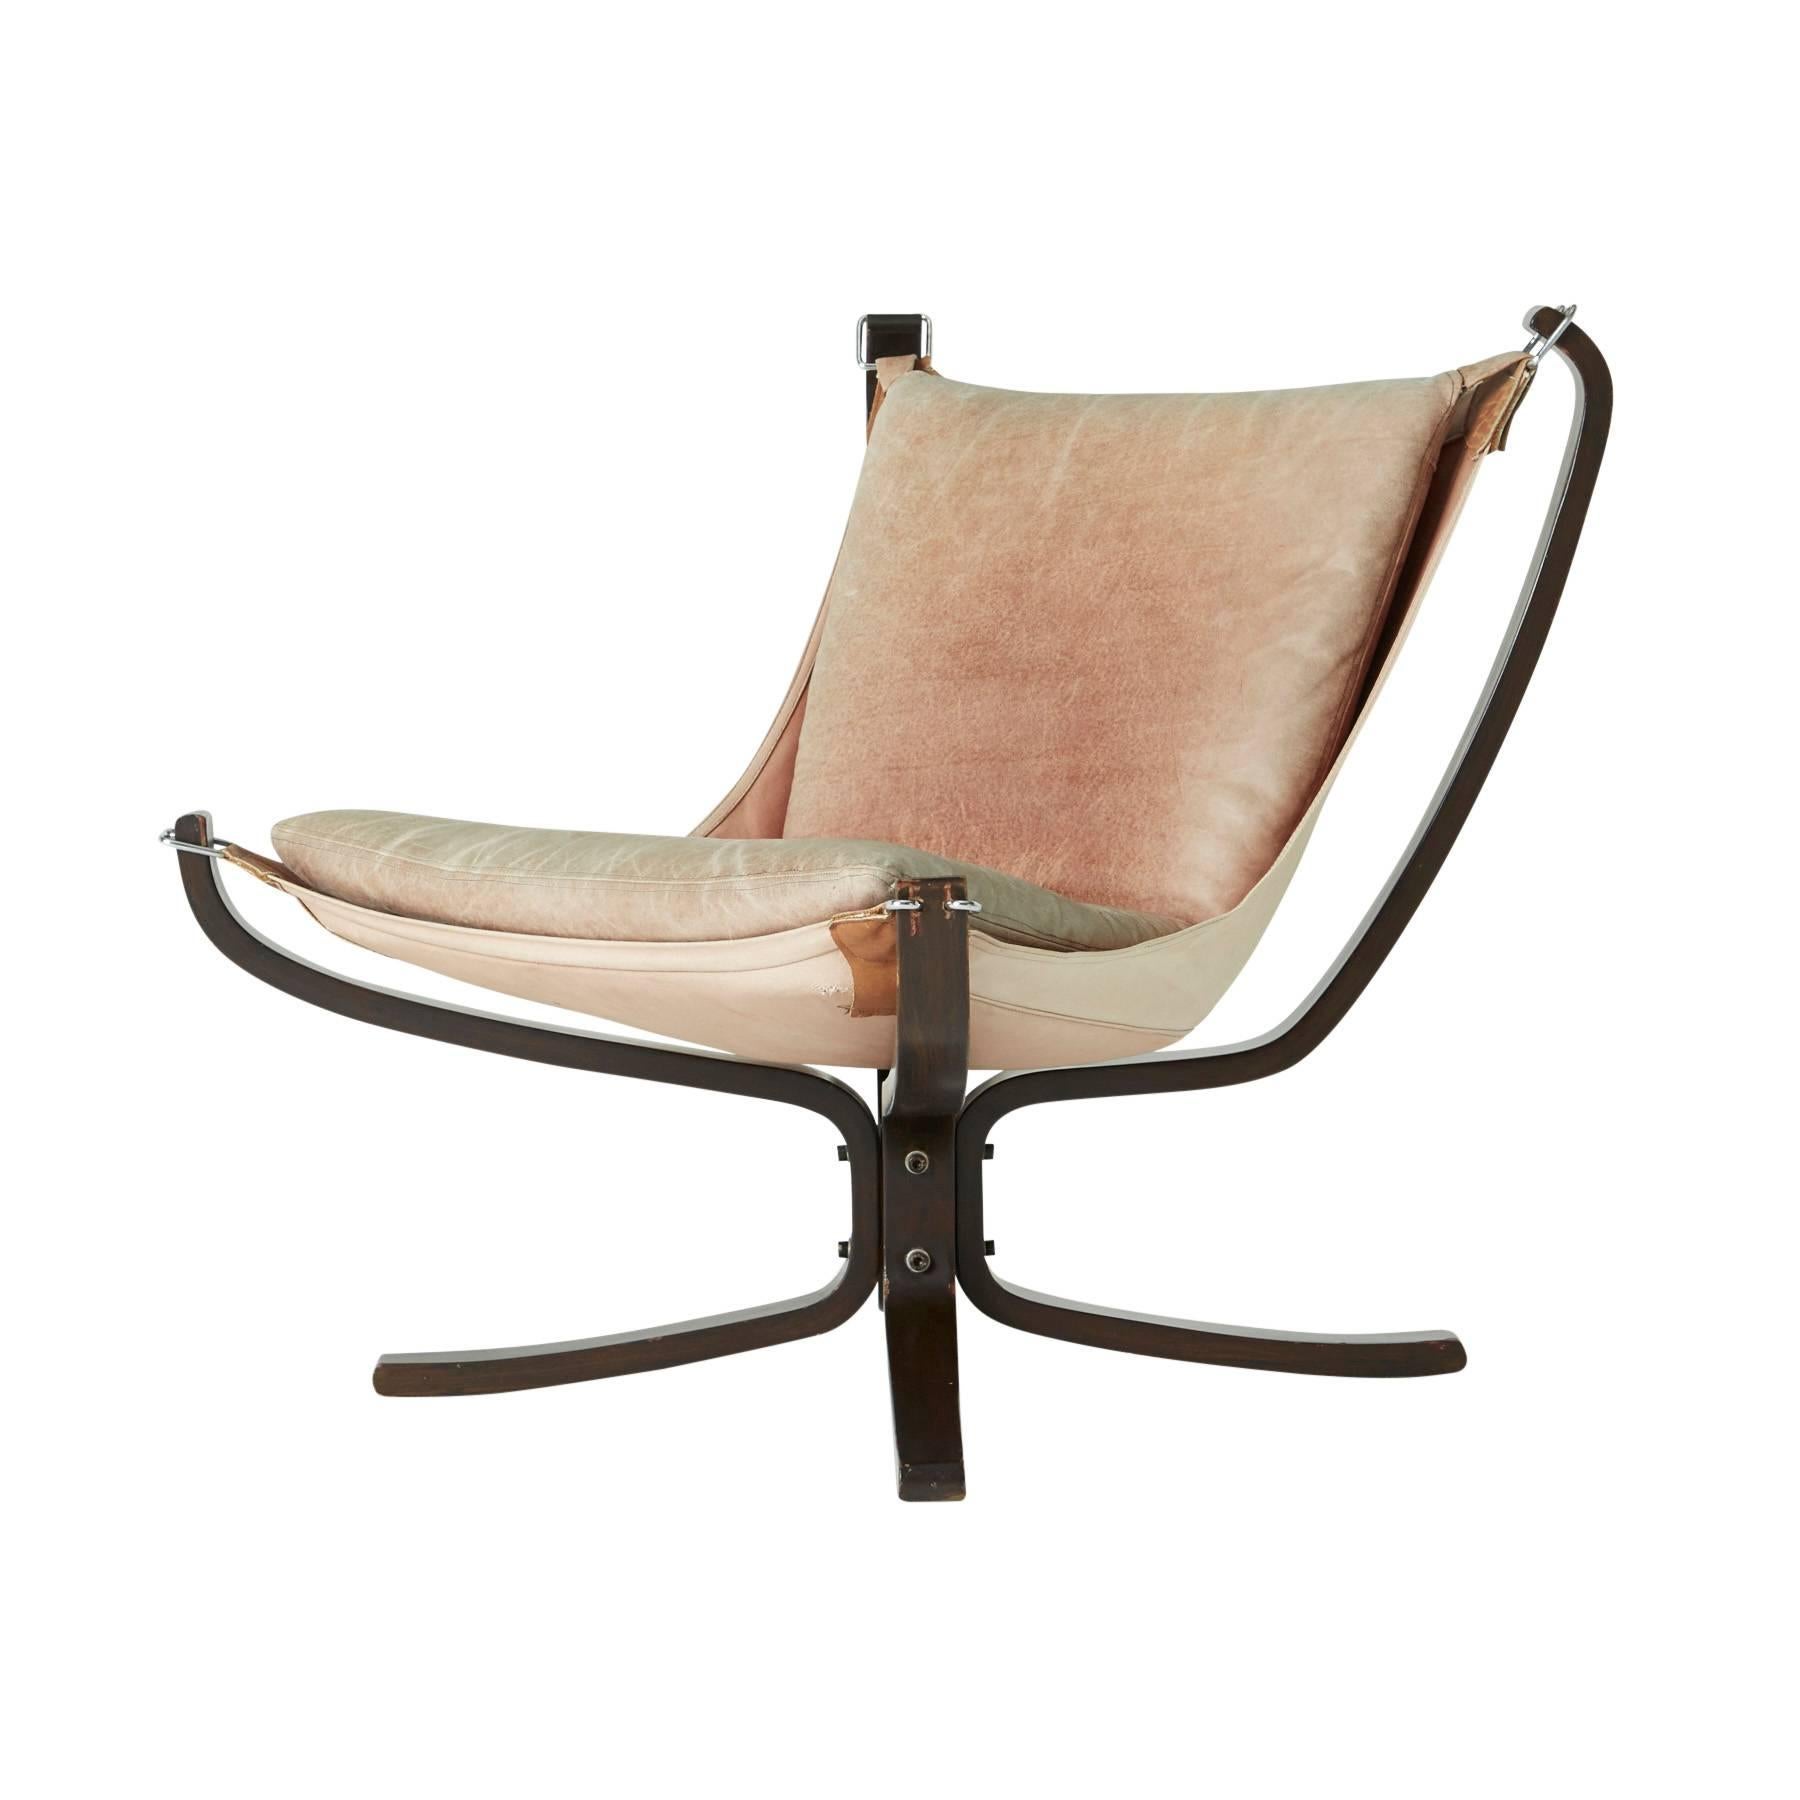 Falcon Chair by Sigurd Ressell for Vatne Møbler